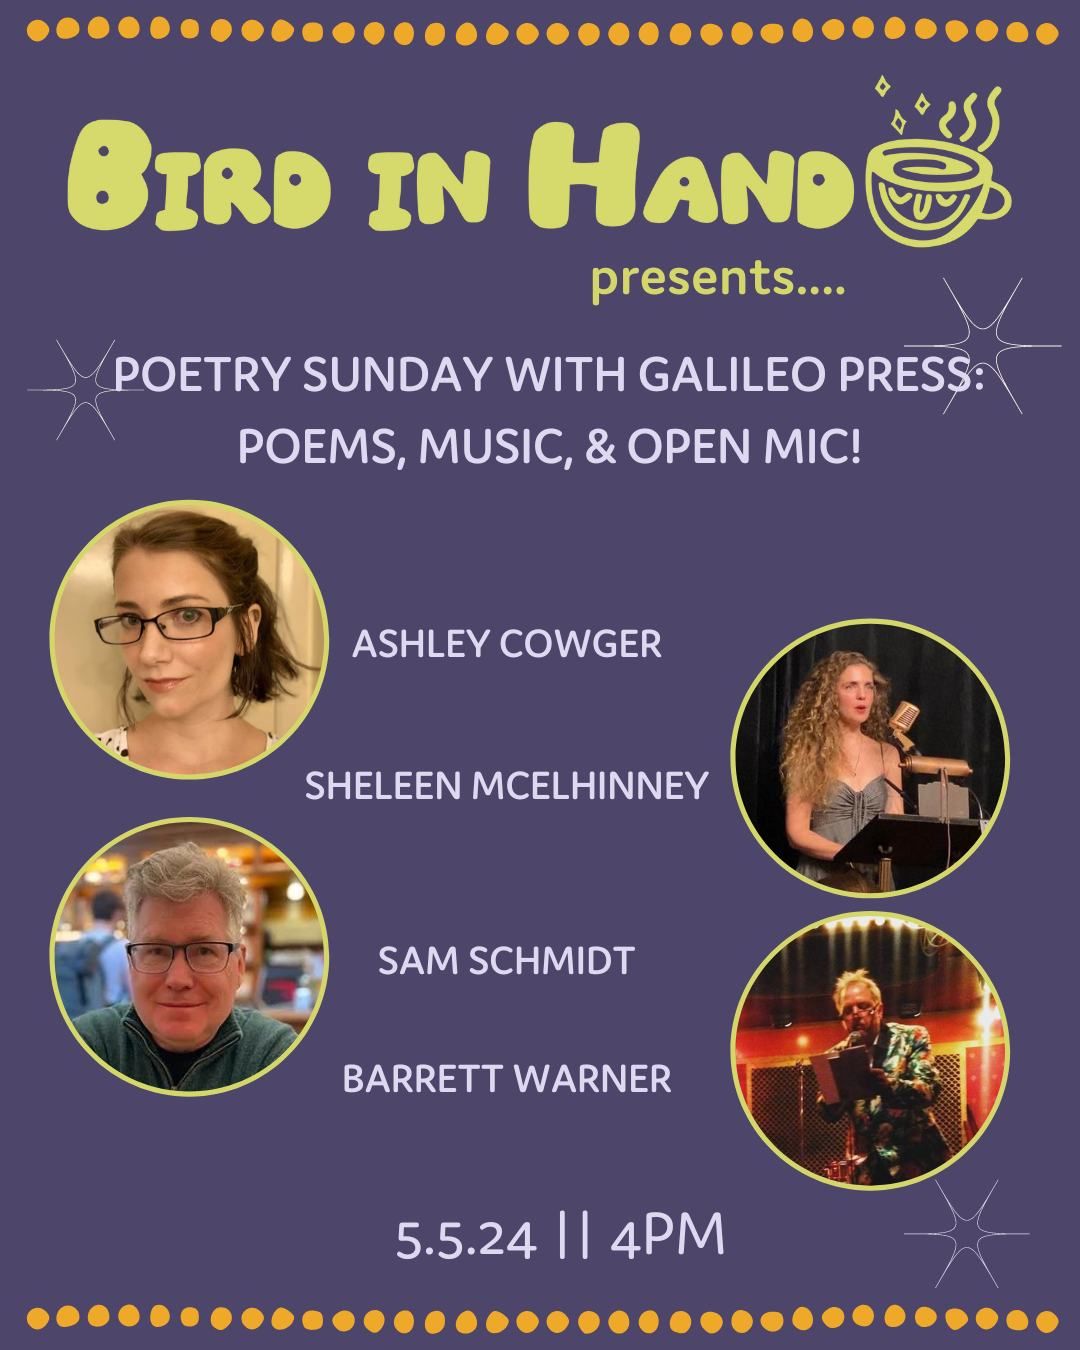 Poetry Sunday With Galileo Press: Poems, Music, & Open Mic!